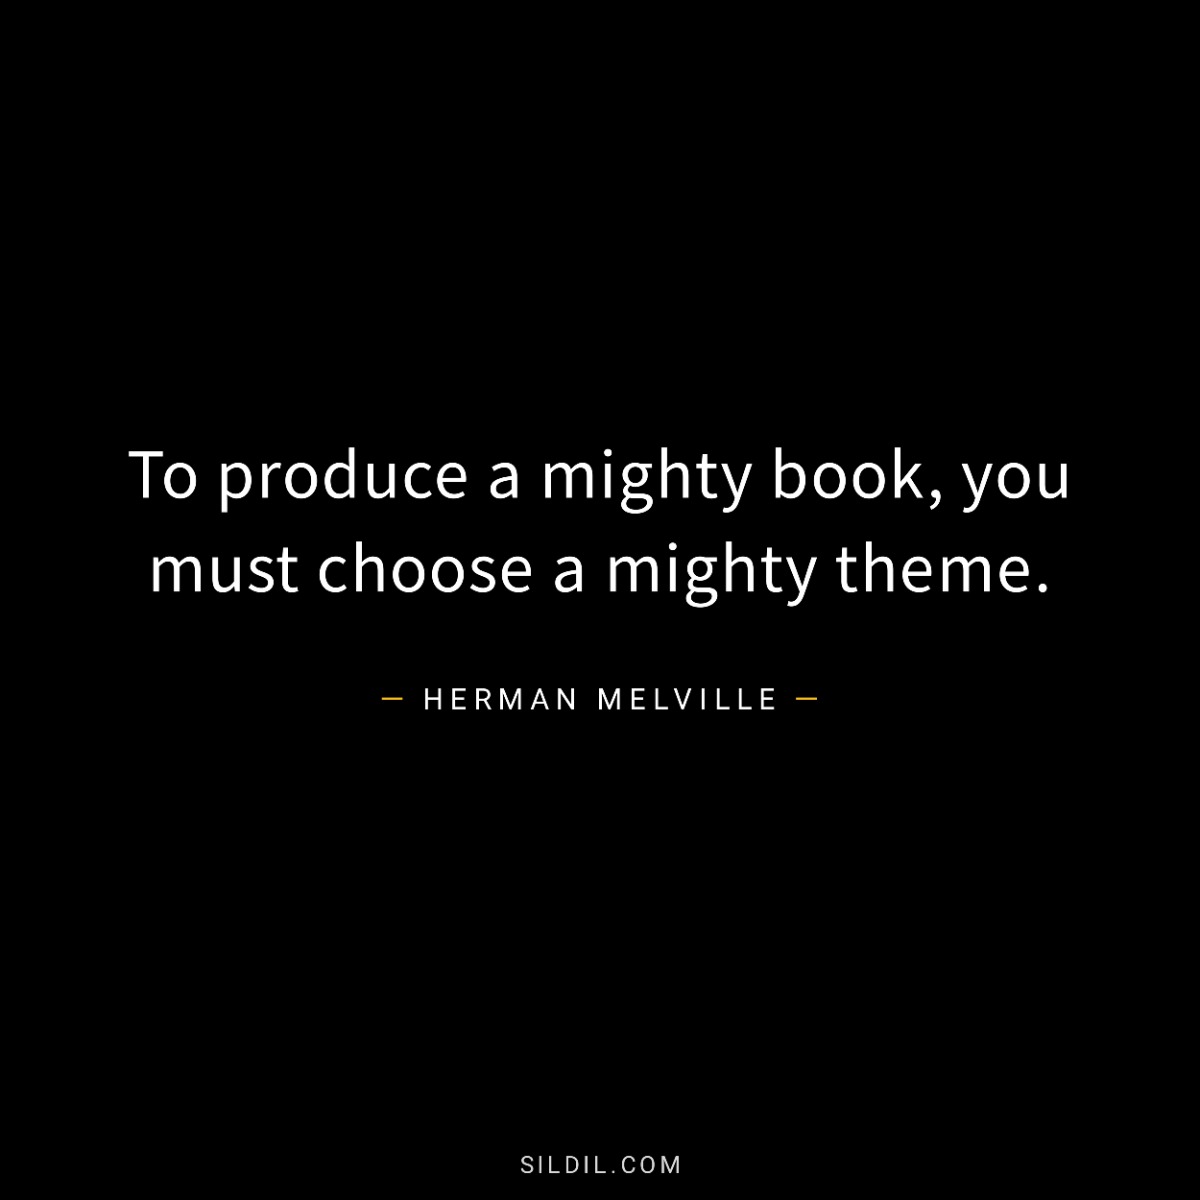 To produce a mighty book, you must choose a mighty theme.